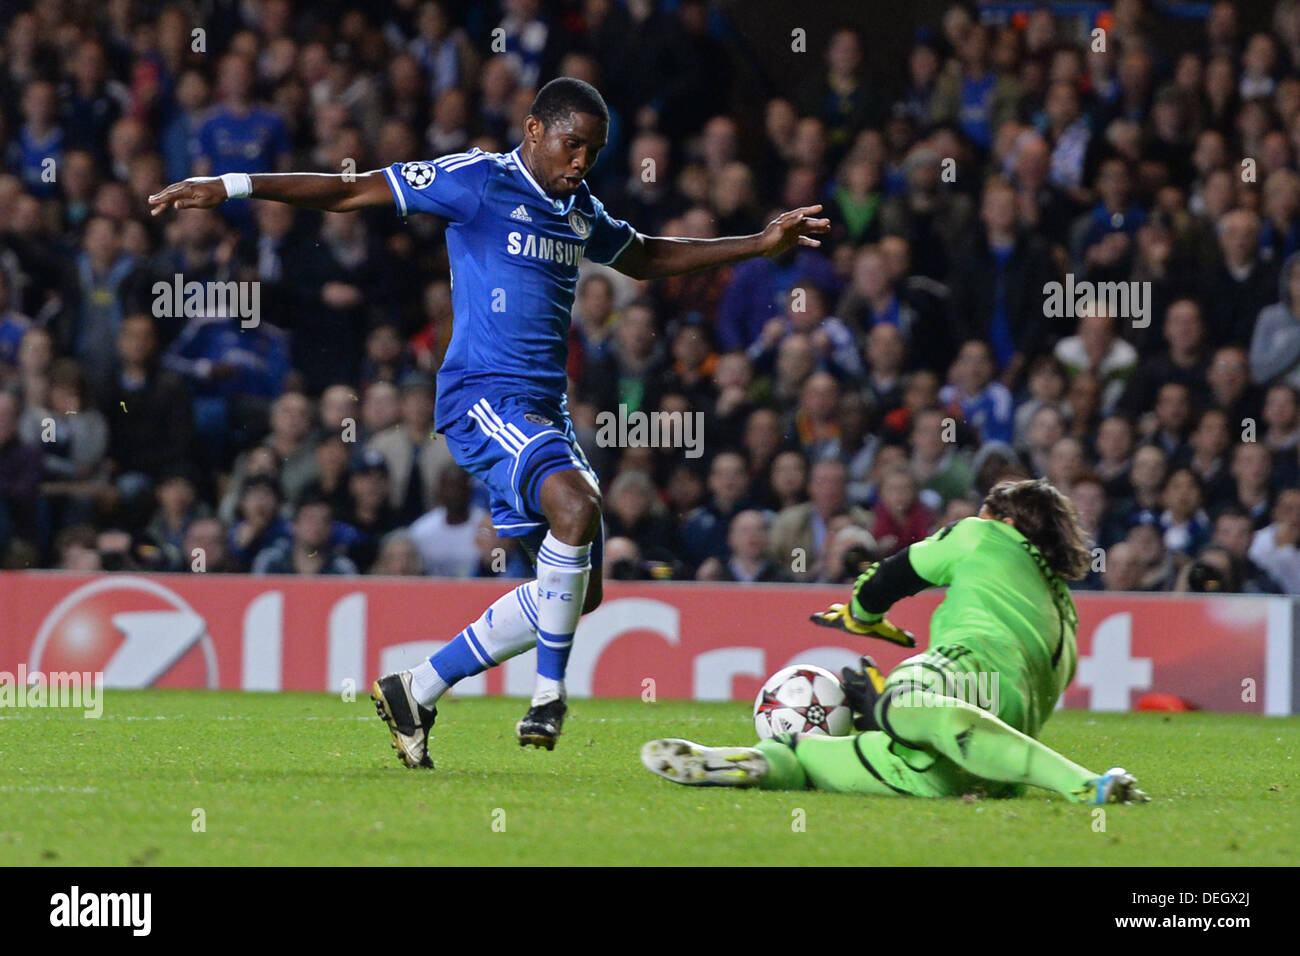 LONDON, ENGLAND - September 18: Basel's Yann Sommer dives at the feet of Chelsea's Samuel Eto'o  during the UEFA Champions League Group E match between Chelsea from England and Basel from Switzerland played at Stamford Bridge, on September 18, 2013 in London, England. (Photo by Mitchell Gunn/ESPA) Credit:  European Sports Photographic Agency/Alamy Live News Stock Photo